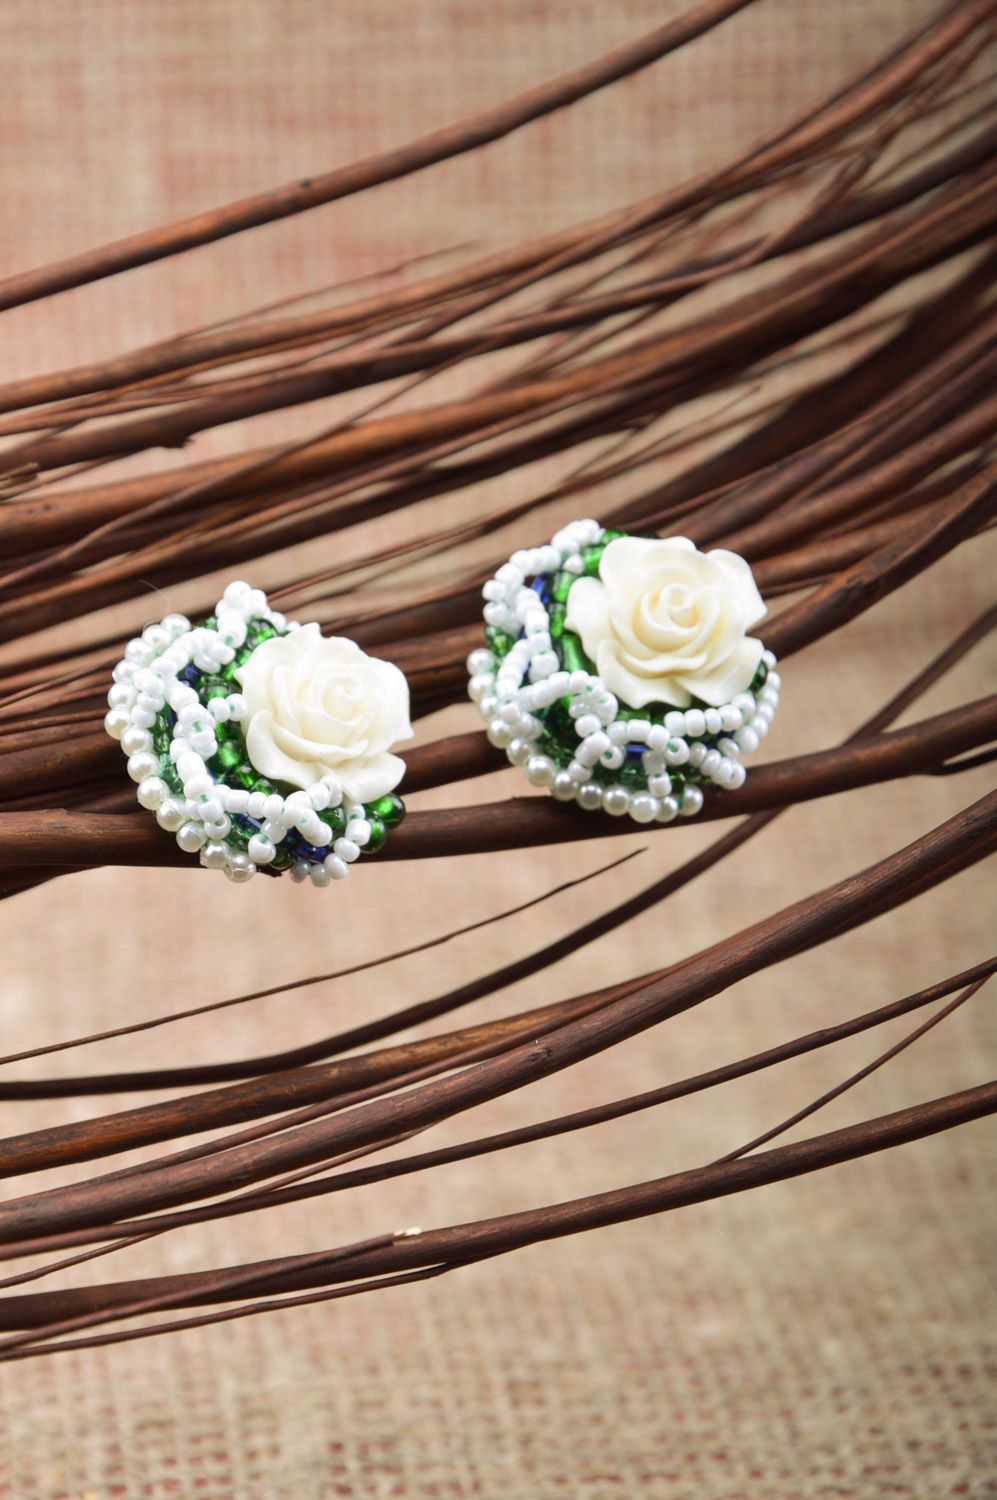 Handmade festive large white and green beaded stud earrings with roses photo 5